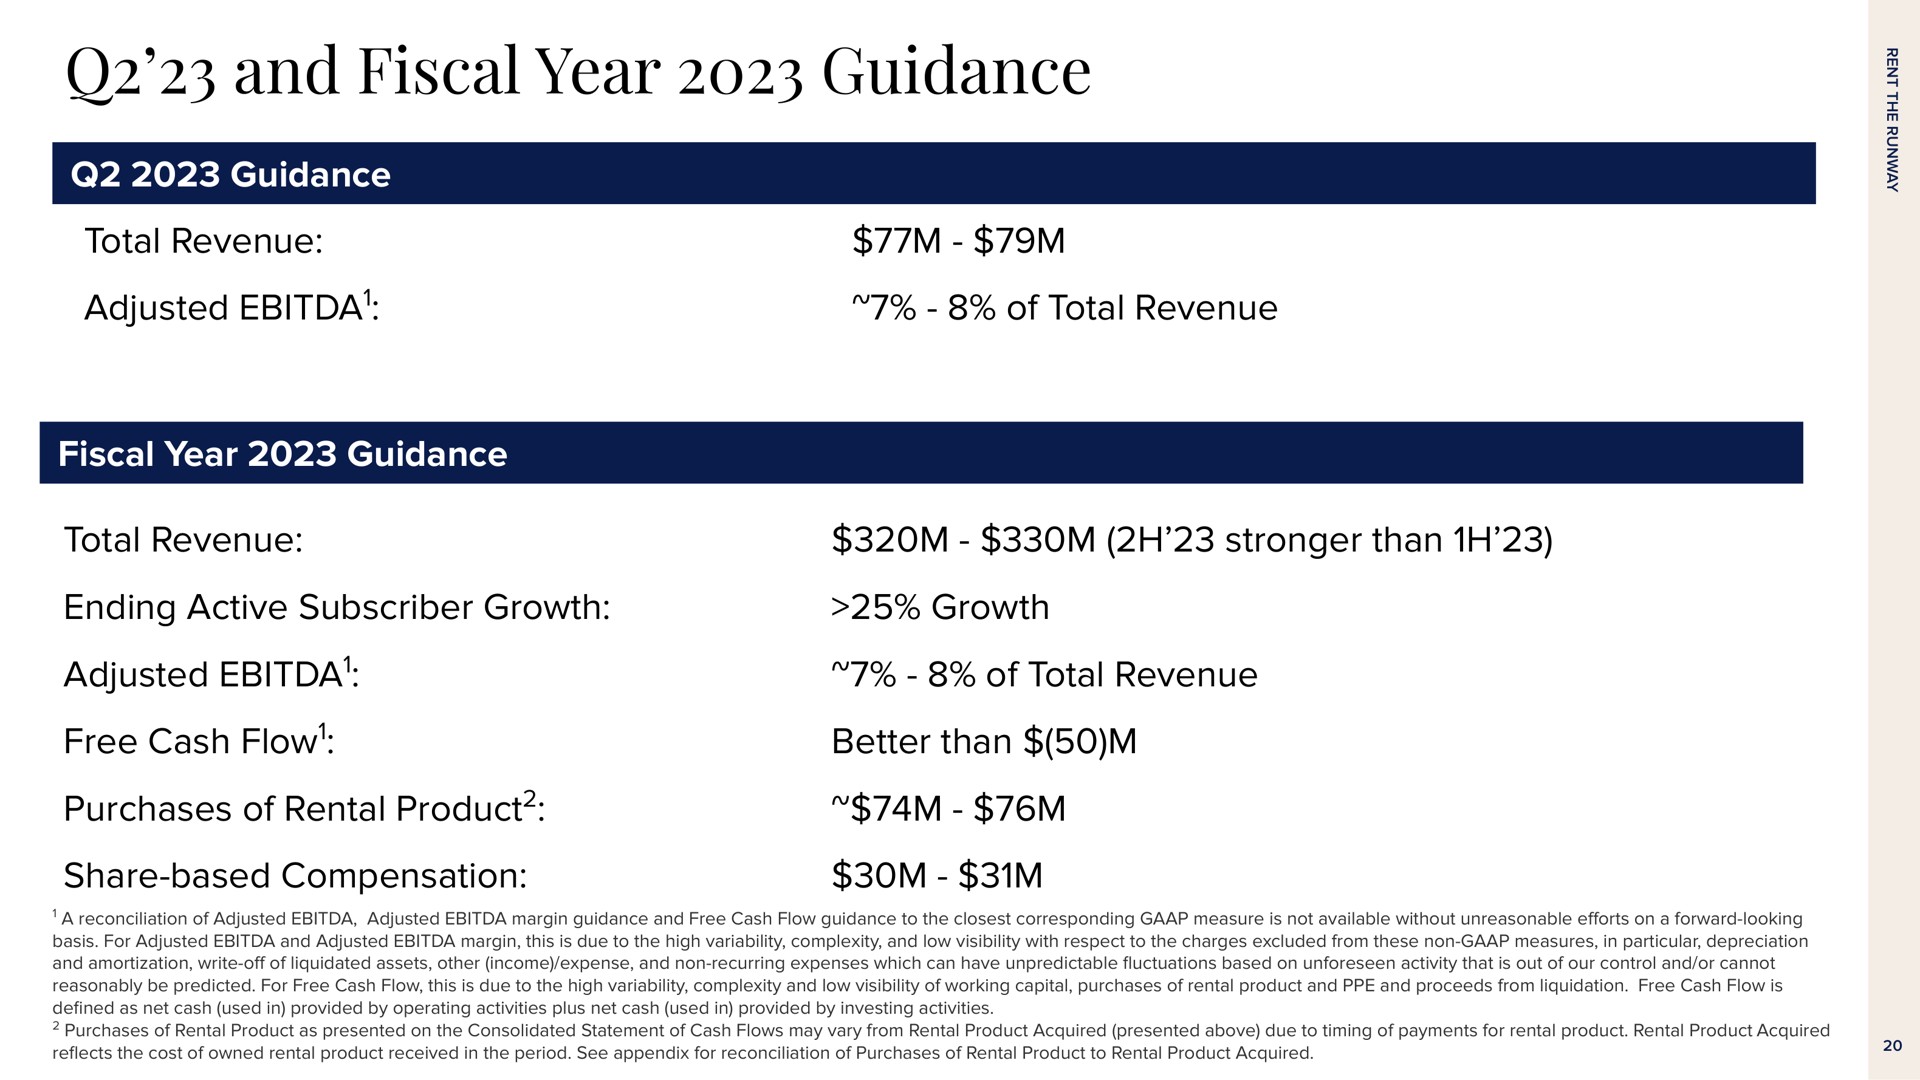 and fiscal year guidance guidance total revenue adjusted fiscal year guidance of total revenue total revenue than ending active subscriber growth growth adjusted free cash flow purchases of rental product of total revenue better than share based compensation | Rent The Runway